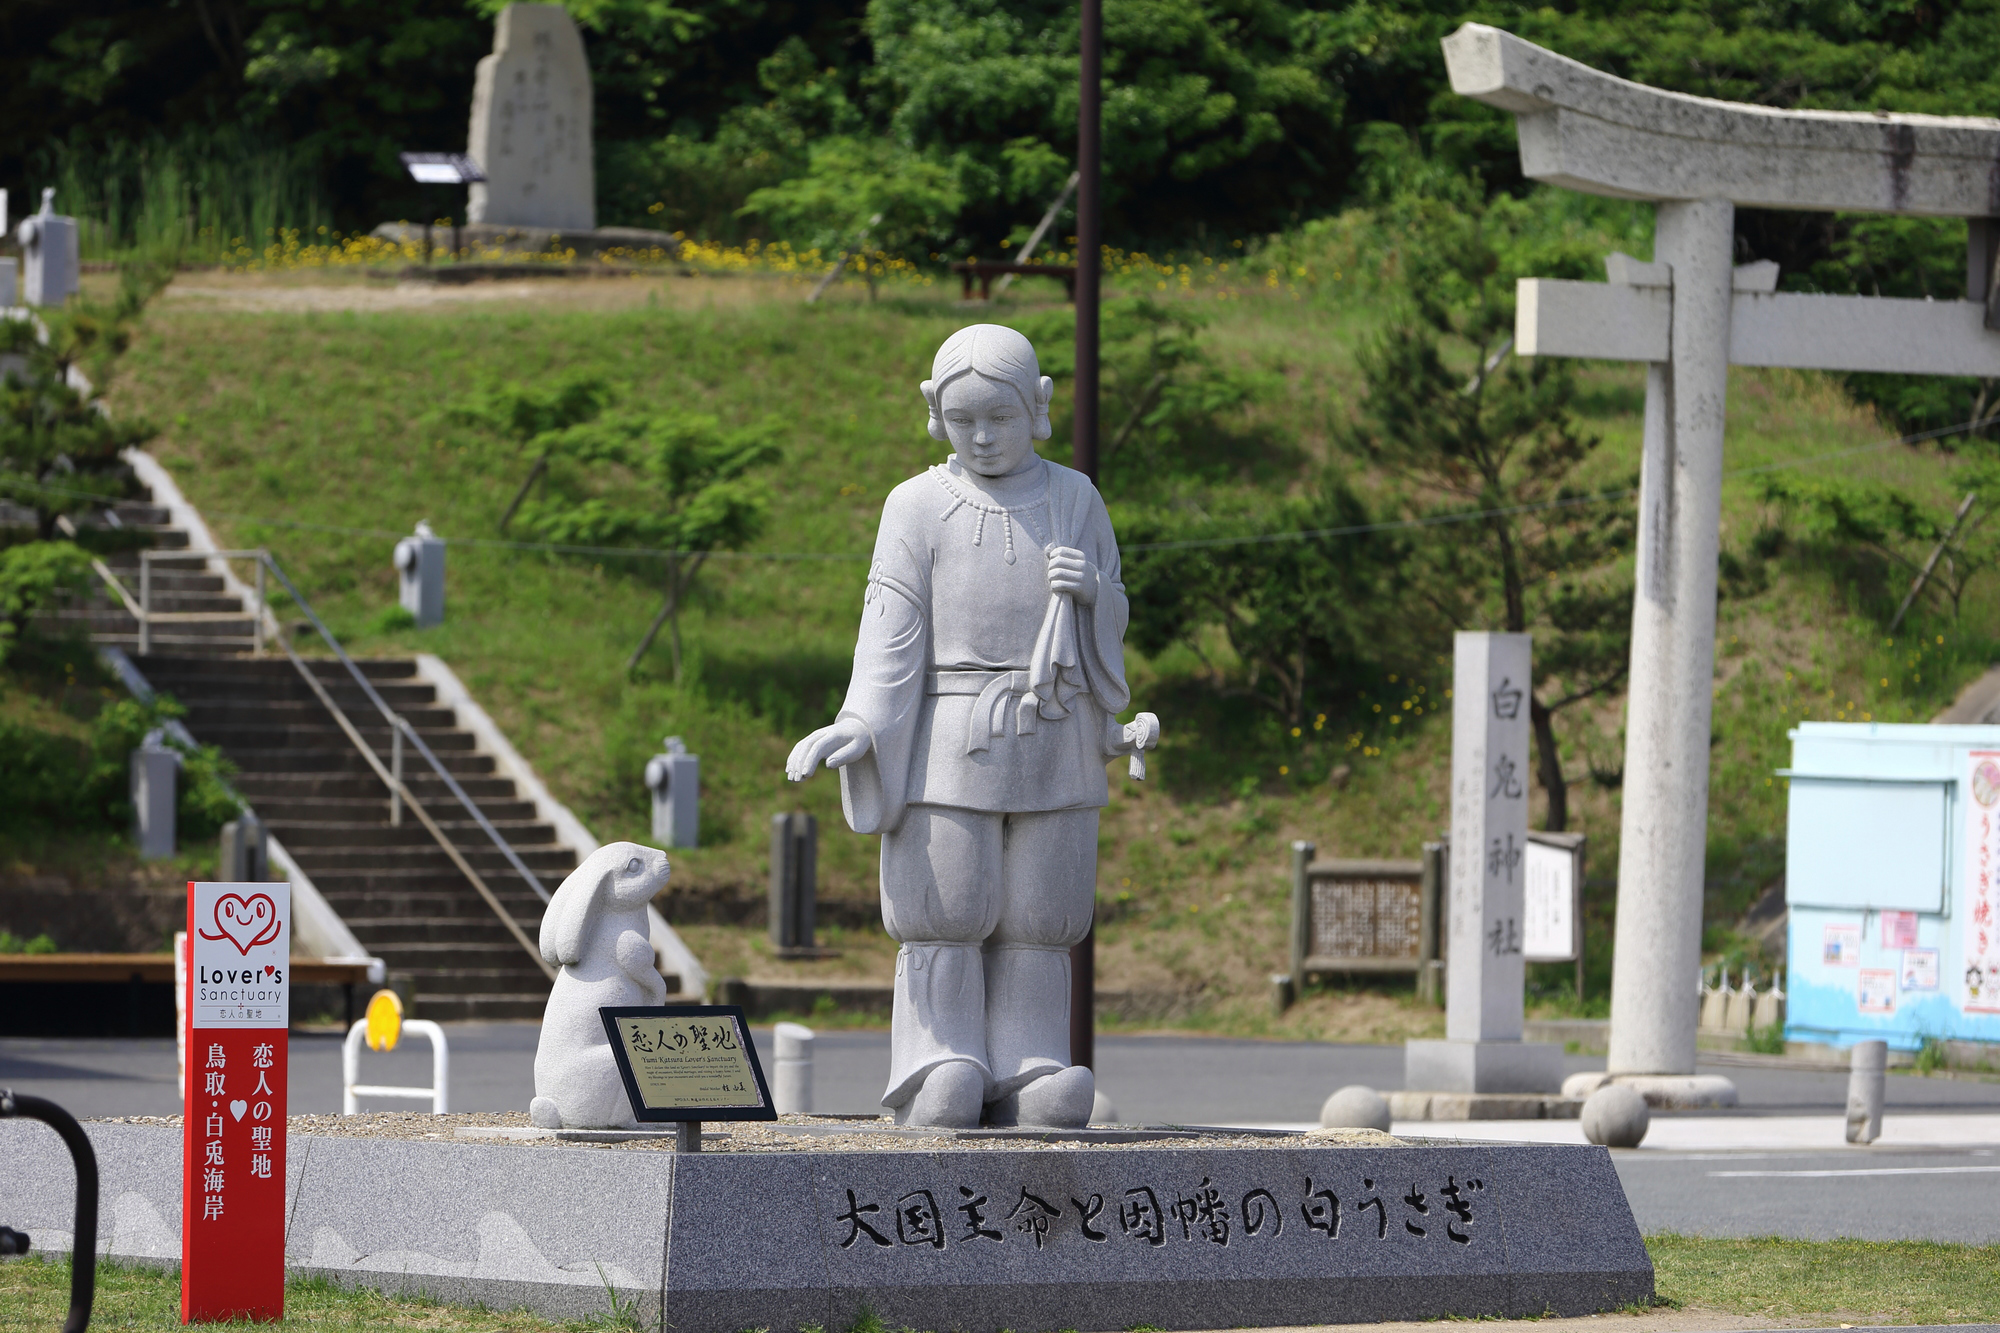 Stone statues of Okuninushi and the white rabbit stand along the Hakuto Coast, which is said to be the site of the myth.